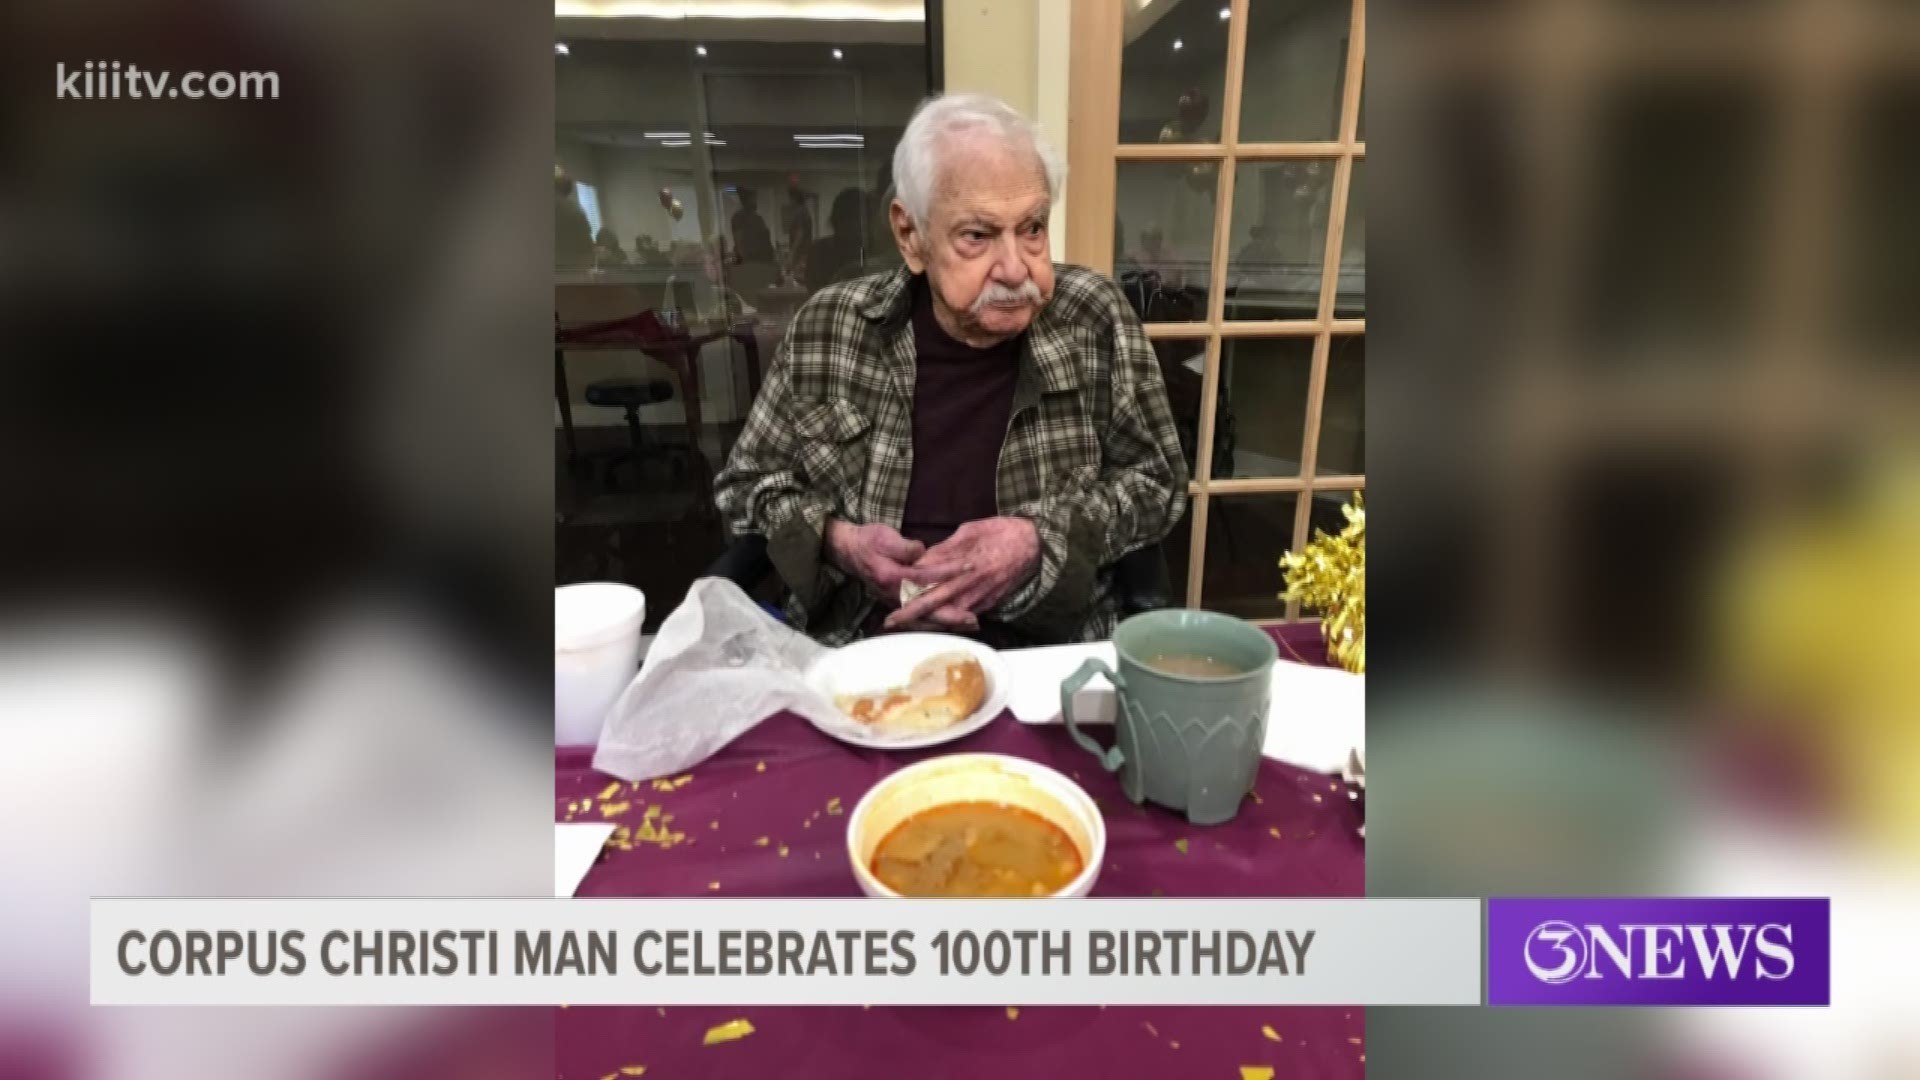 A very special happy birthday is in order for a Corpus Christi man celebrating his 100th birthday.